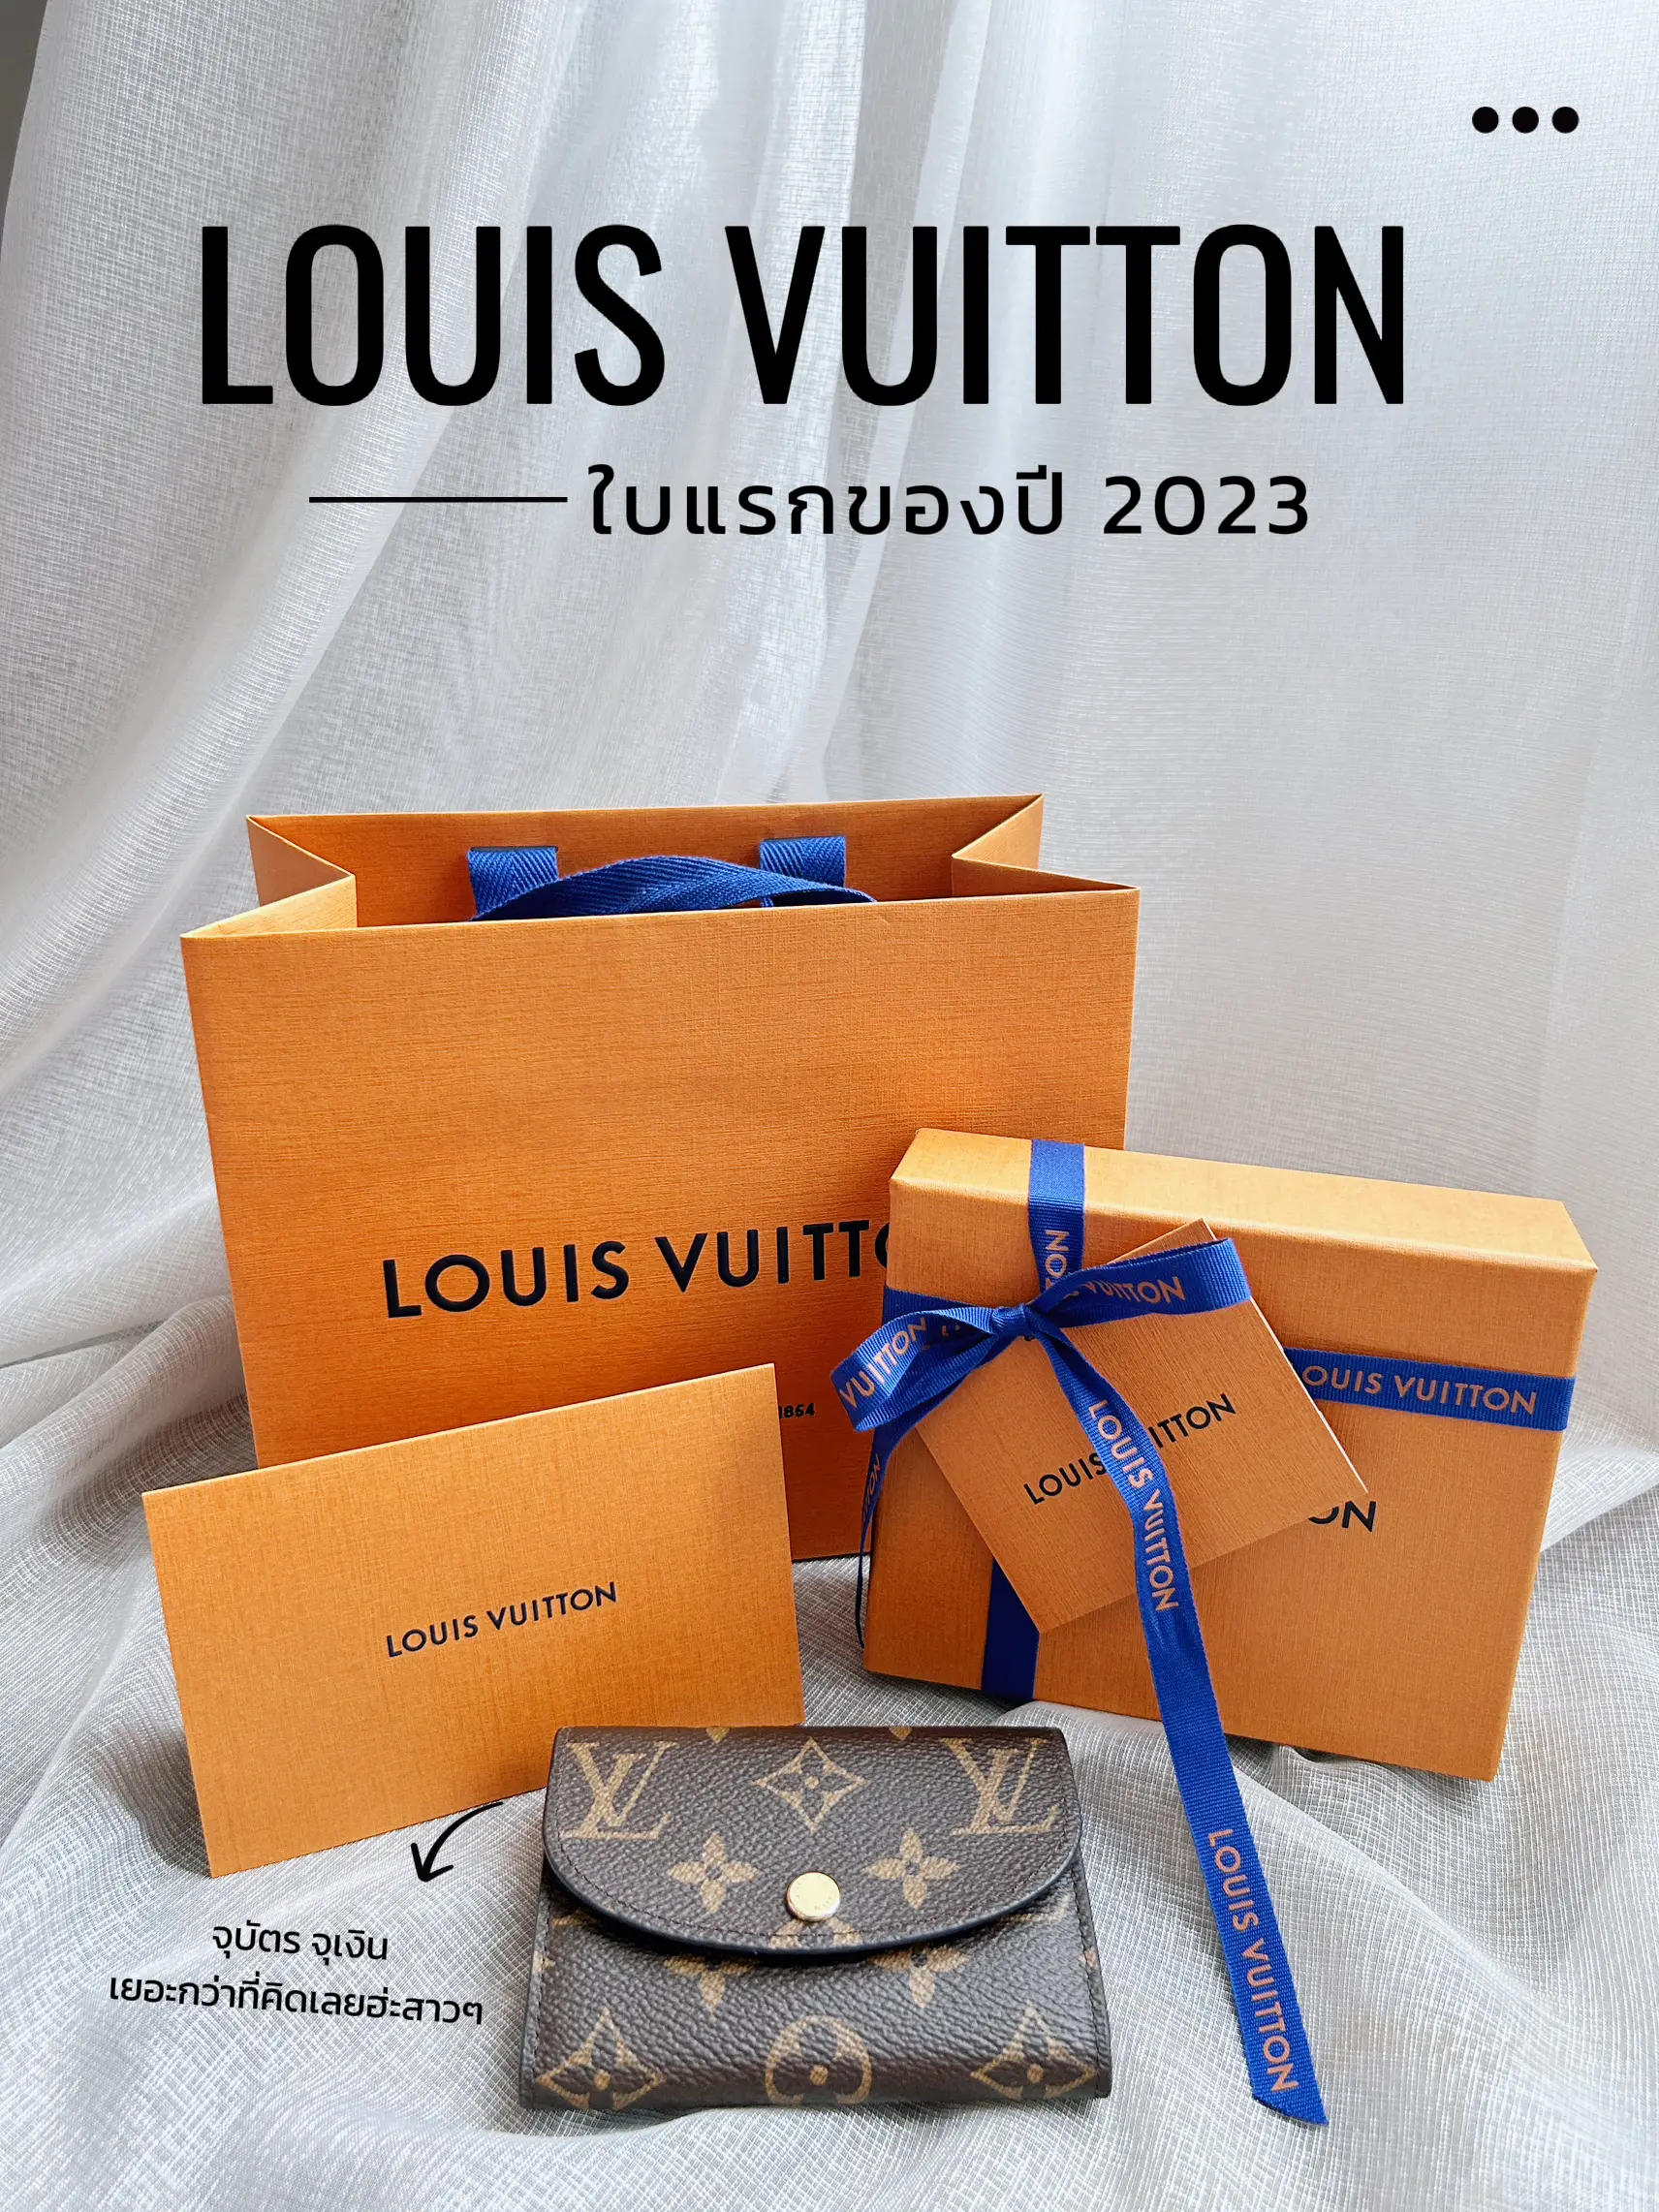 Adding another funky item to my collection #louisvuitton